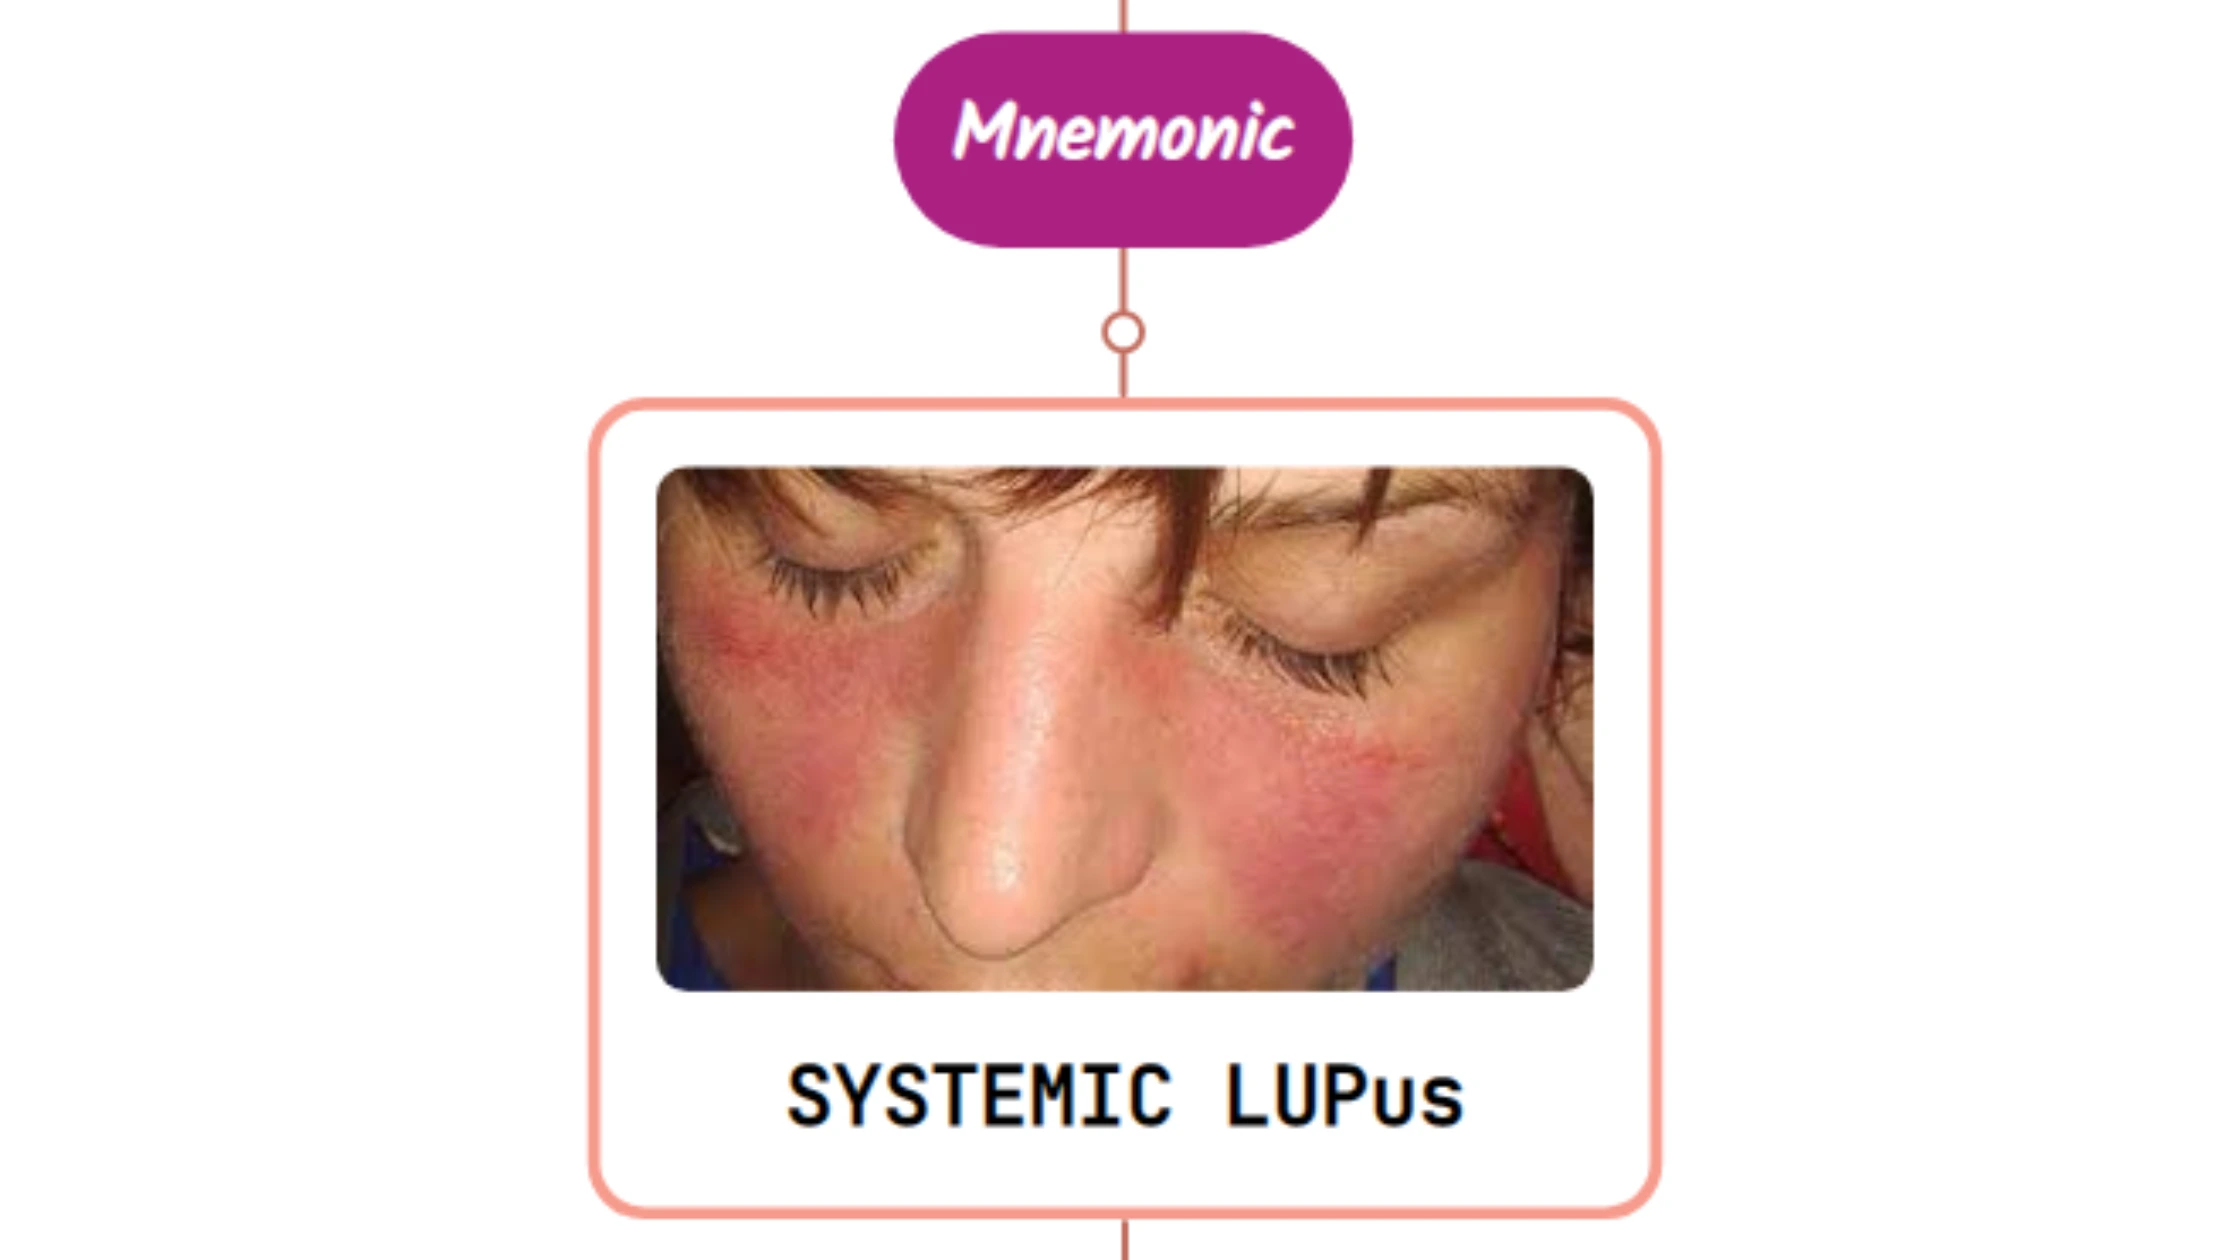 You are currently viewing Systemic Lupus Erythematosus Fever Rash: Mnemonic [NEVER FORGET AGAIN]